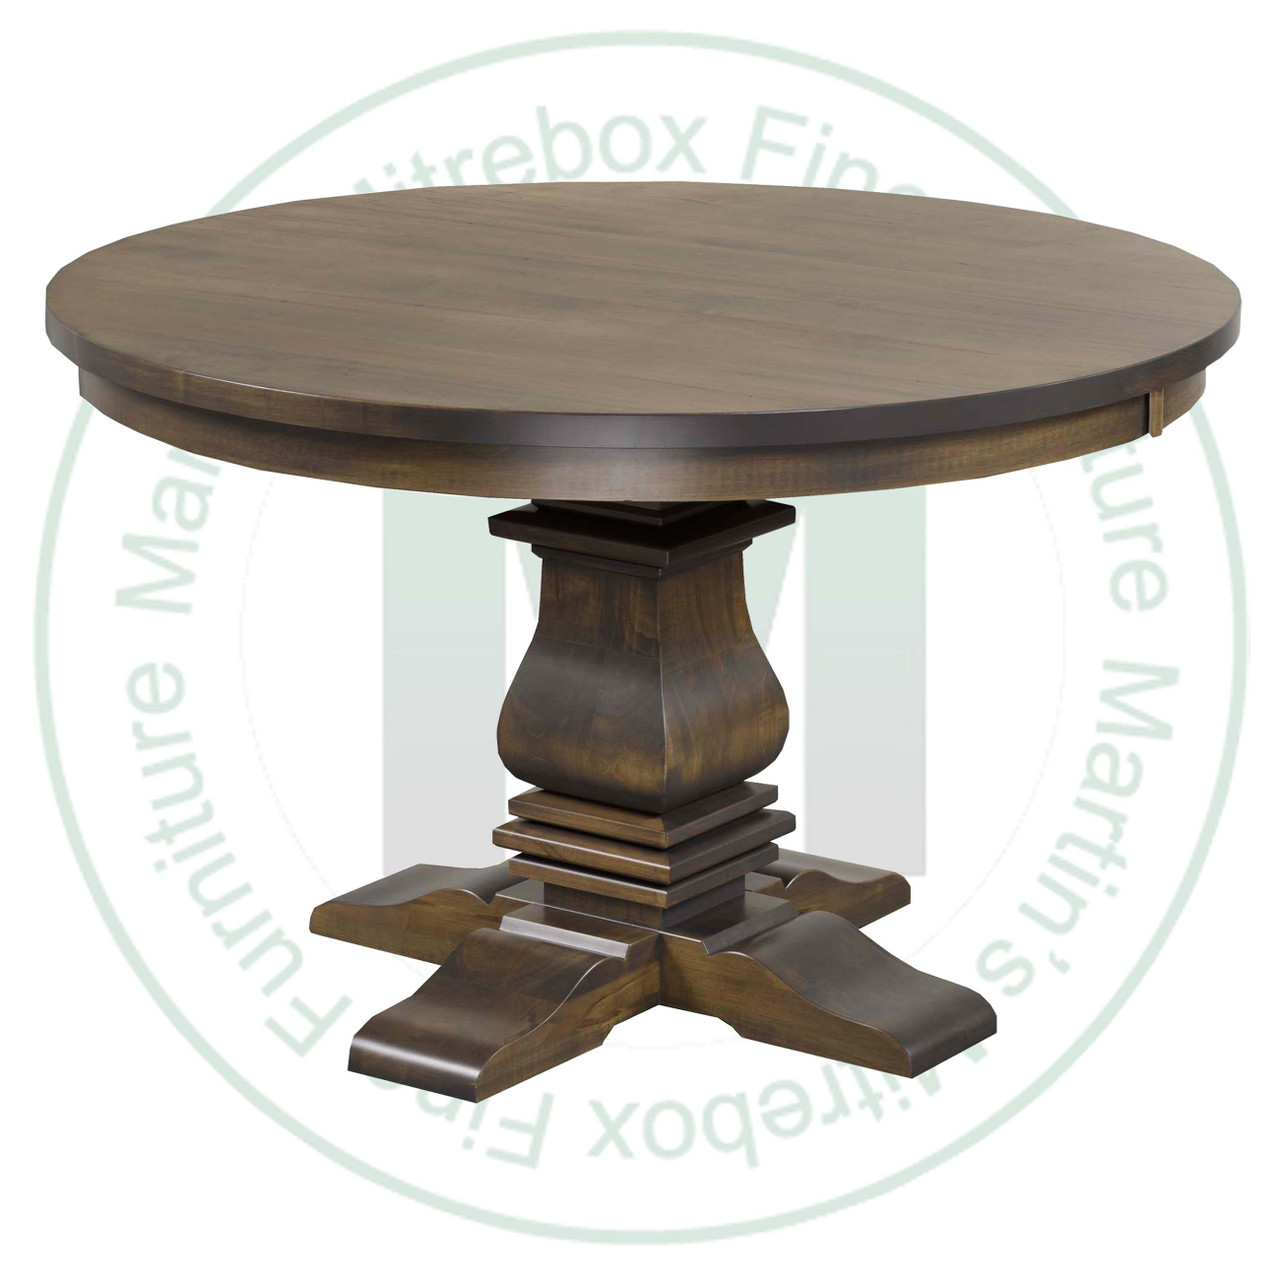 Wormy Maple Spartan Collection Single Pedestal Table 36''D x 36''W x 30''H. Table Has 1'' Thick Top